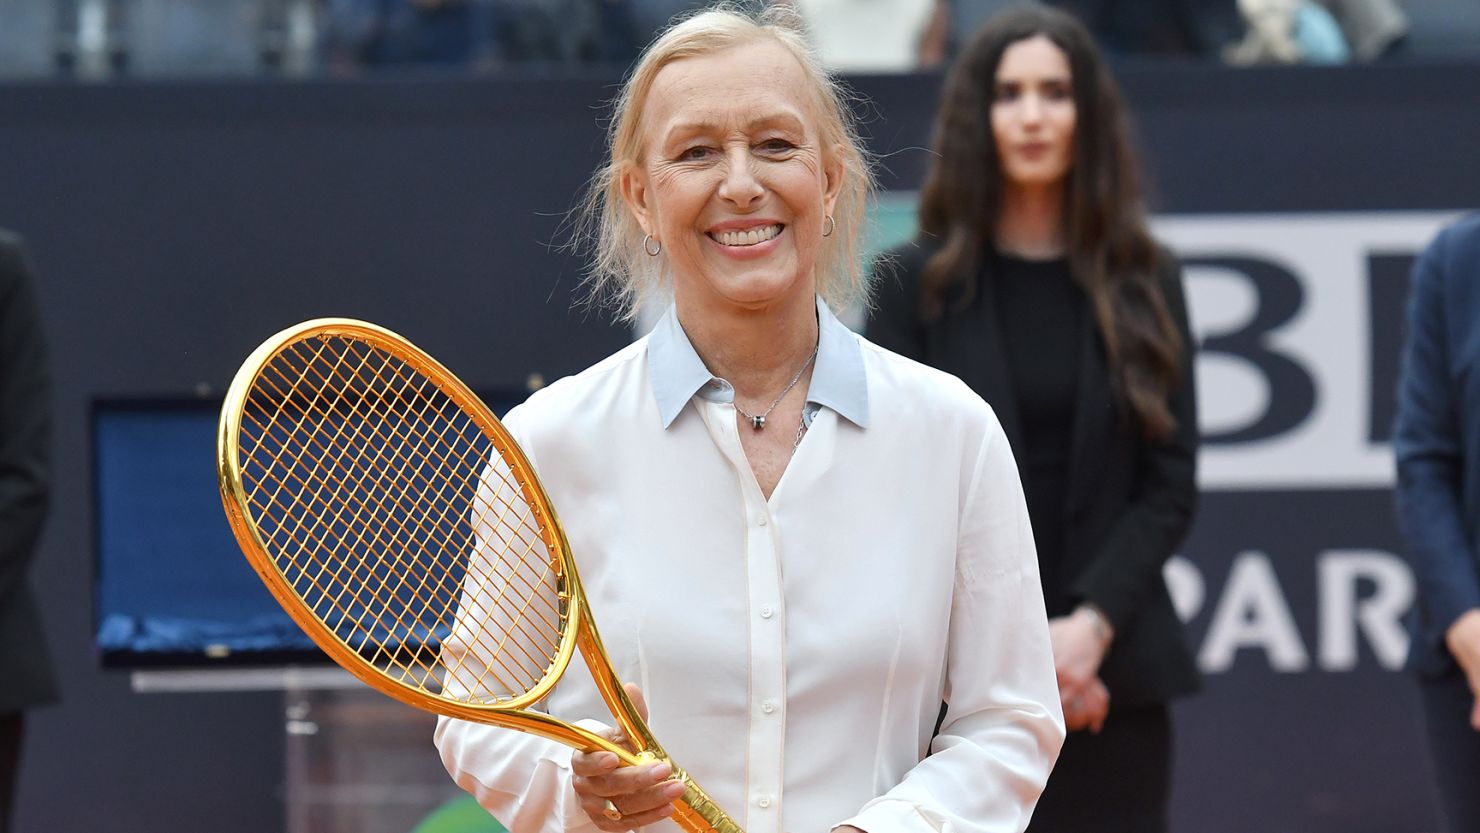 Martina Navratilova: Tennis great tweets that she is 'all clear' after  cancer treatment | CNN